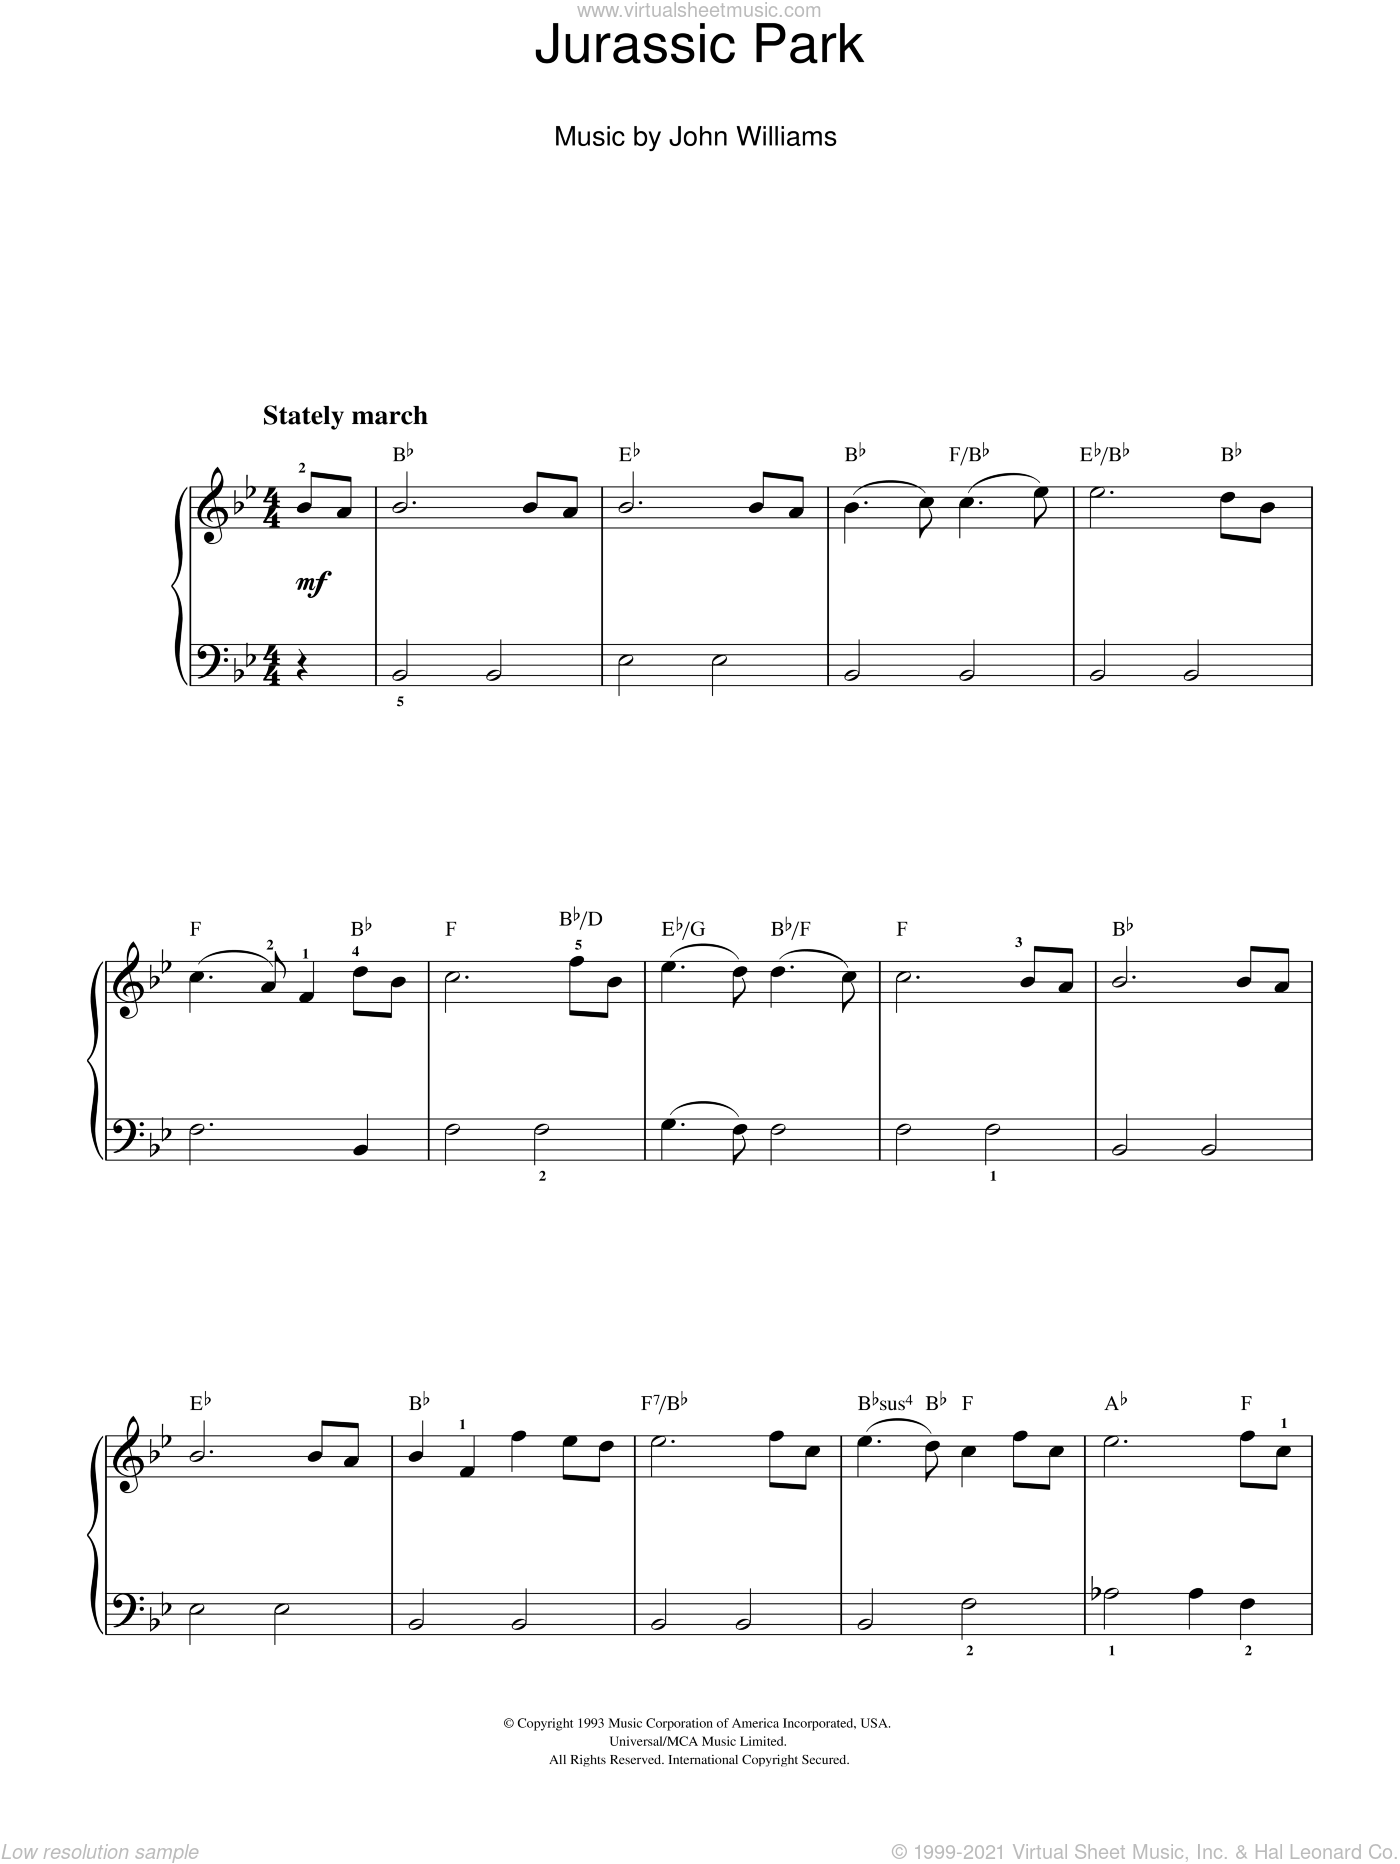 Williams - Jurassic Park (Theme) sheet music (easy) for piano solo